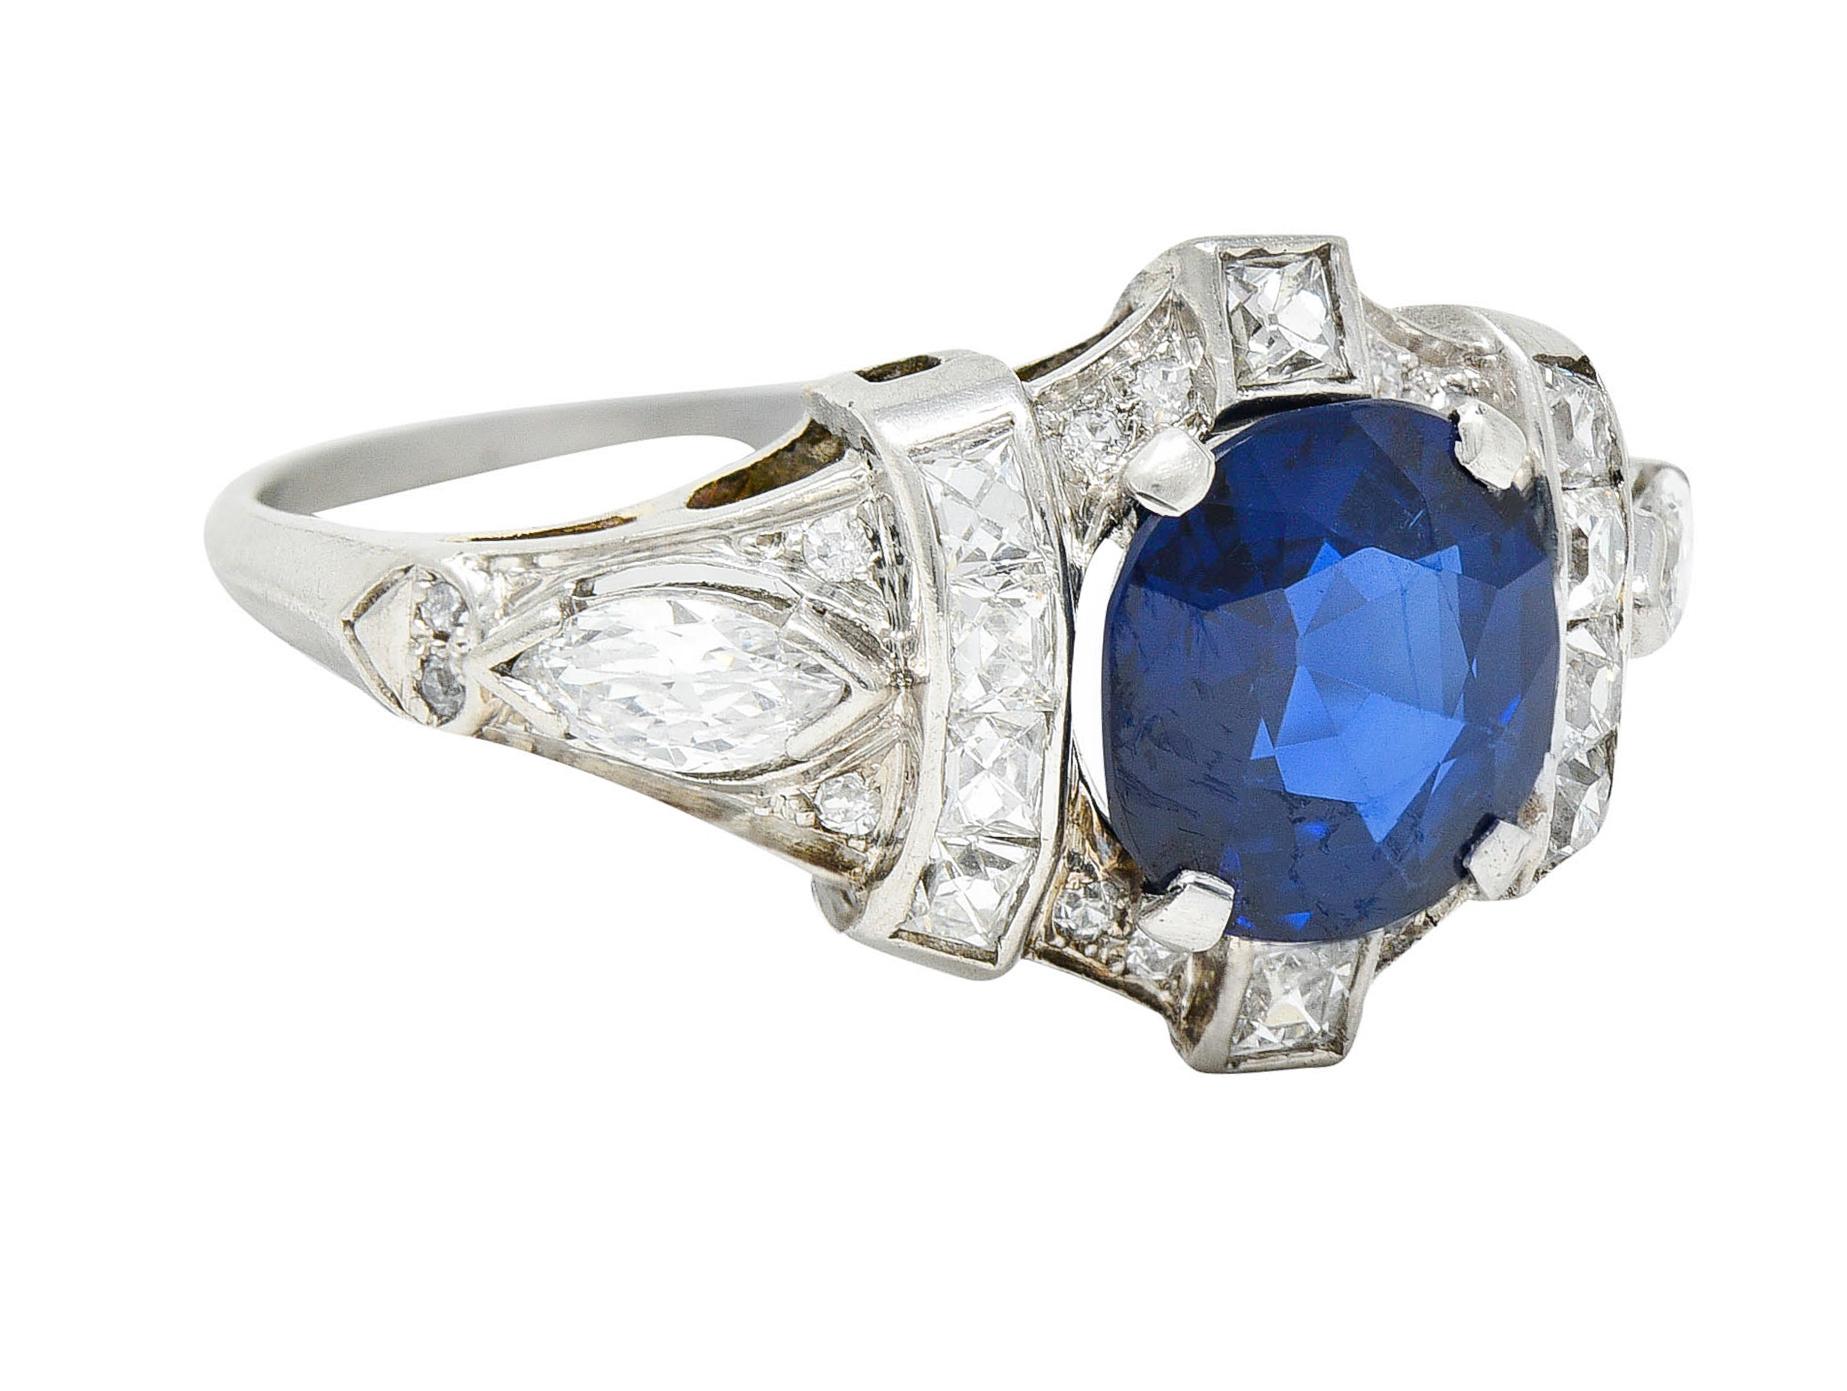 Band ring features a cushion cut sapphire weighing approximately 1.90 carat

Transparent with incredible saturated blue color

With channel set French cut diamonds and marquise cut diamonds at shoulders

Accented throughout by old single cut